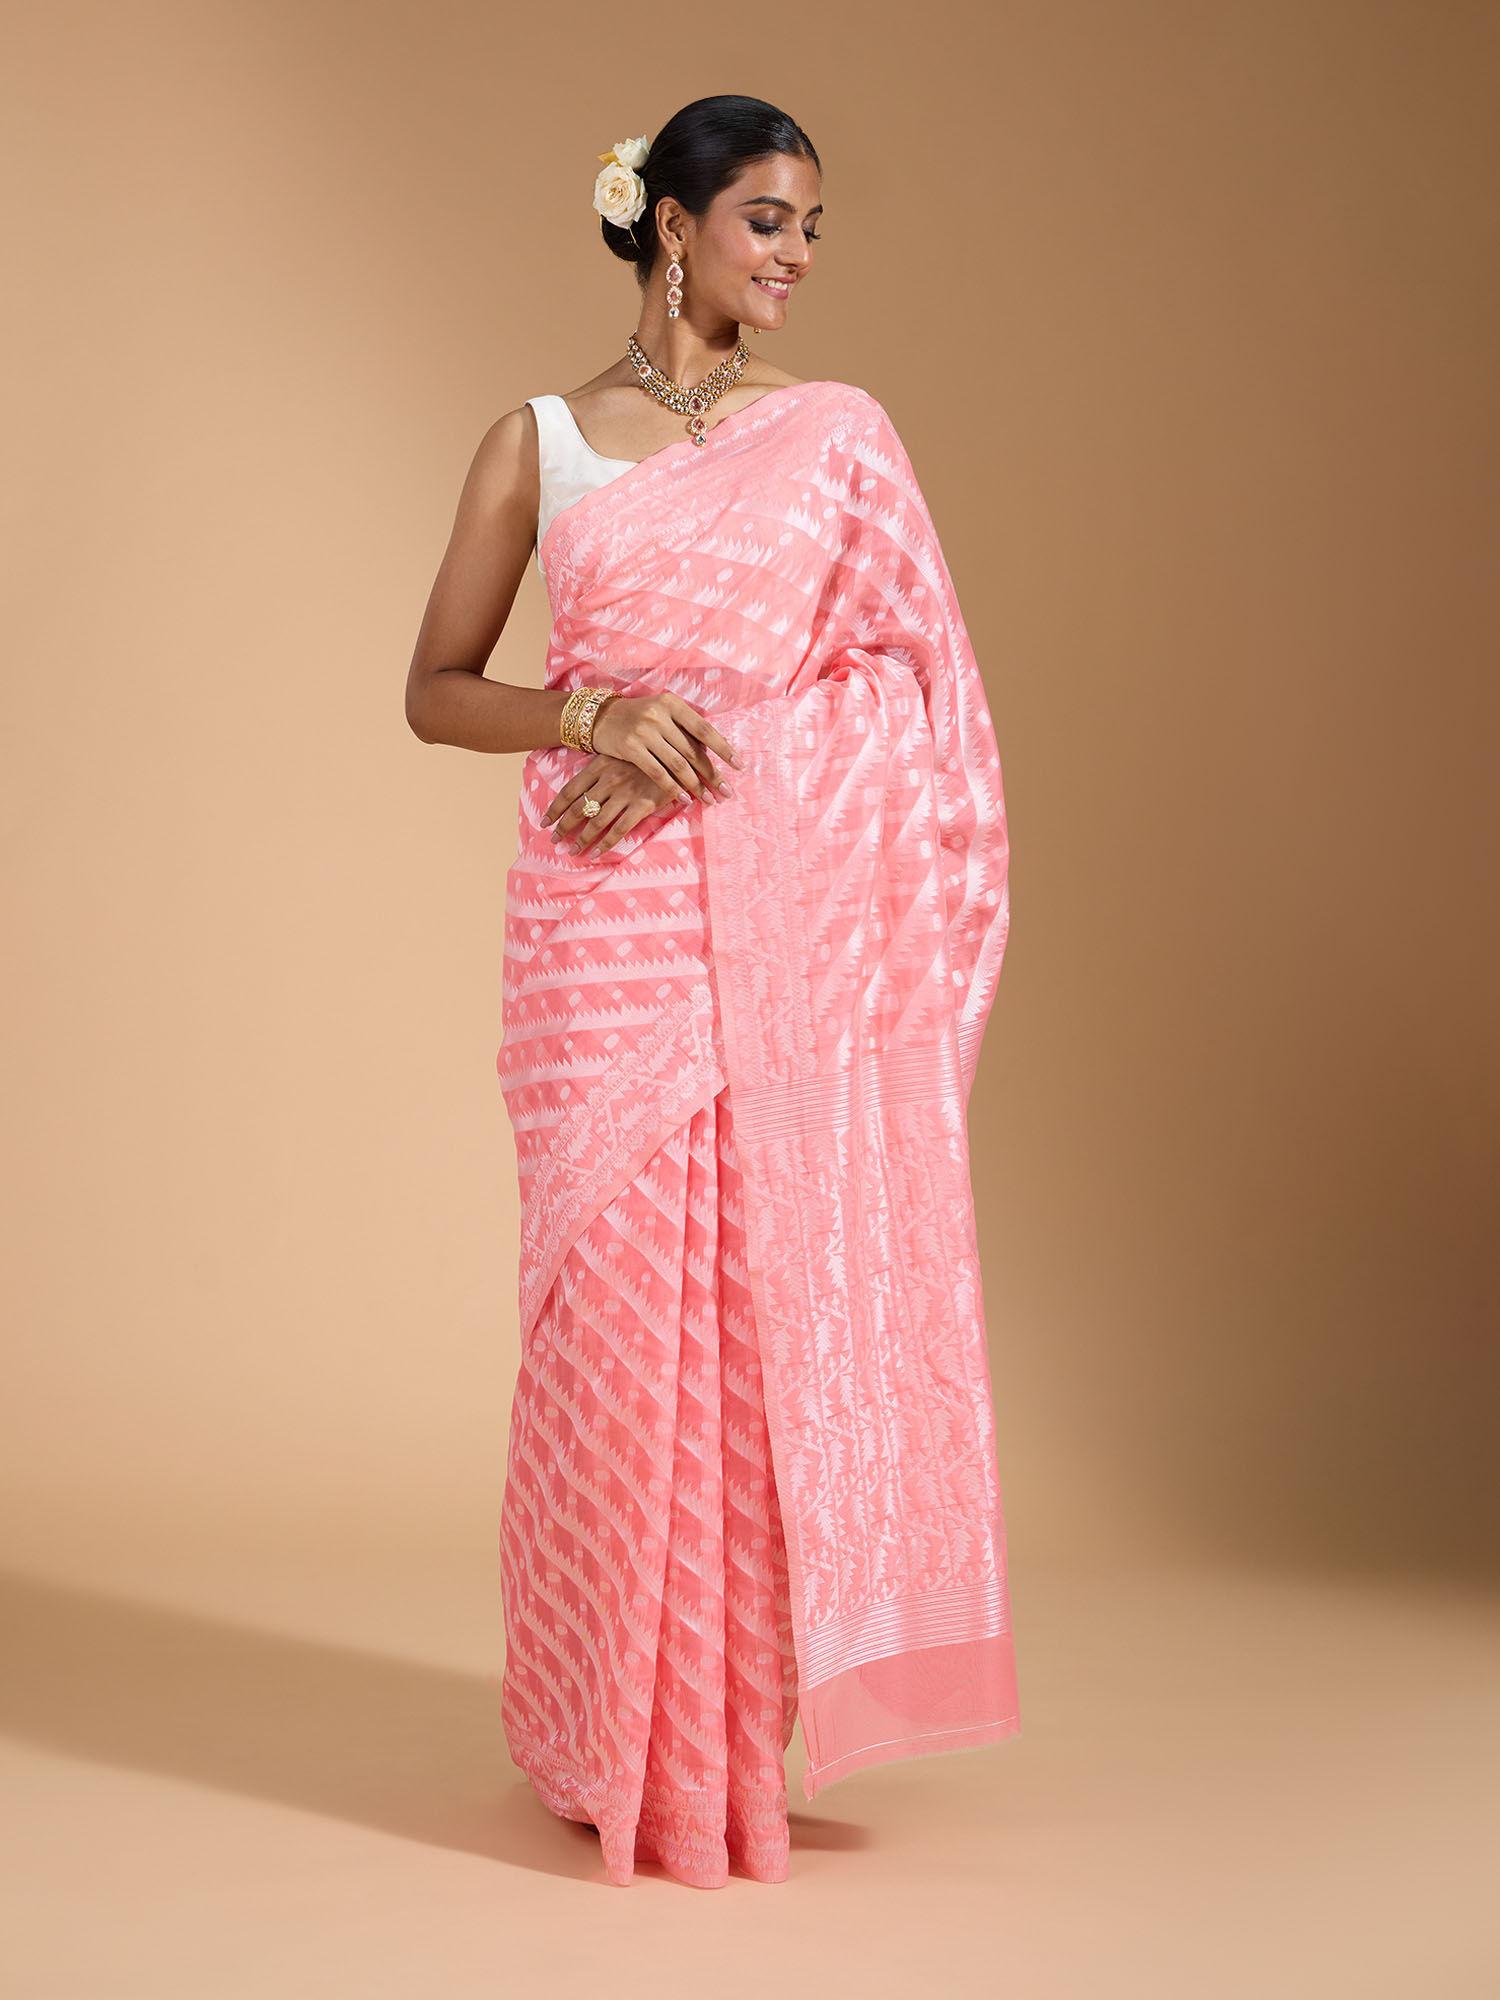 traditional kolkata white zari striped and borders pink saree and unstitched blouse